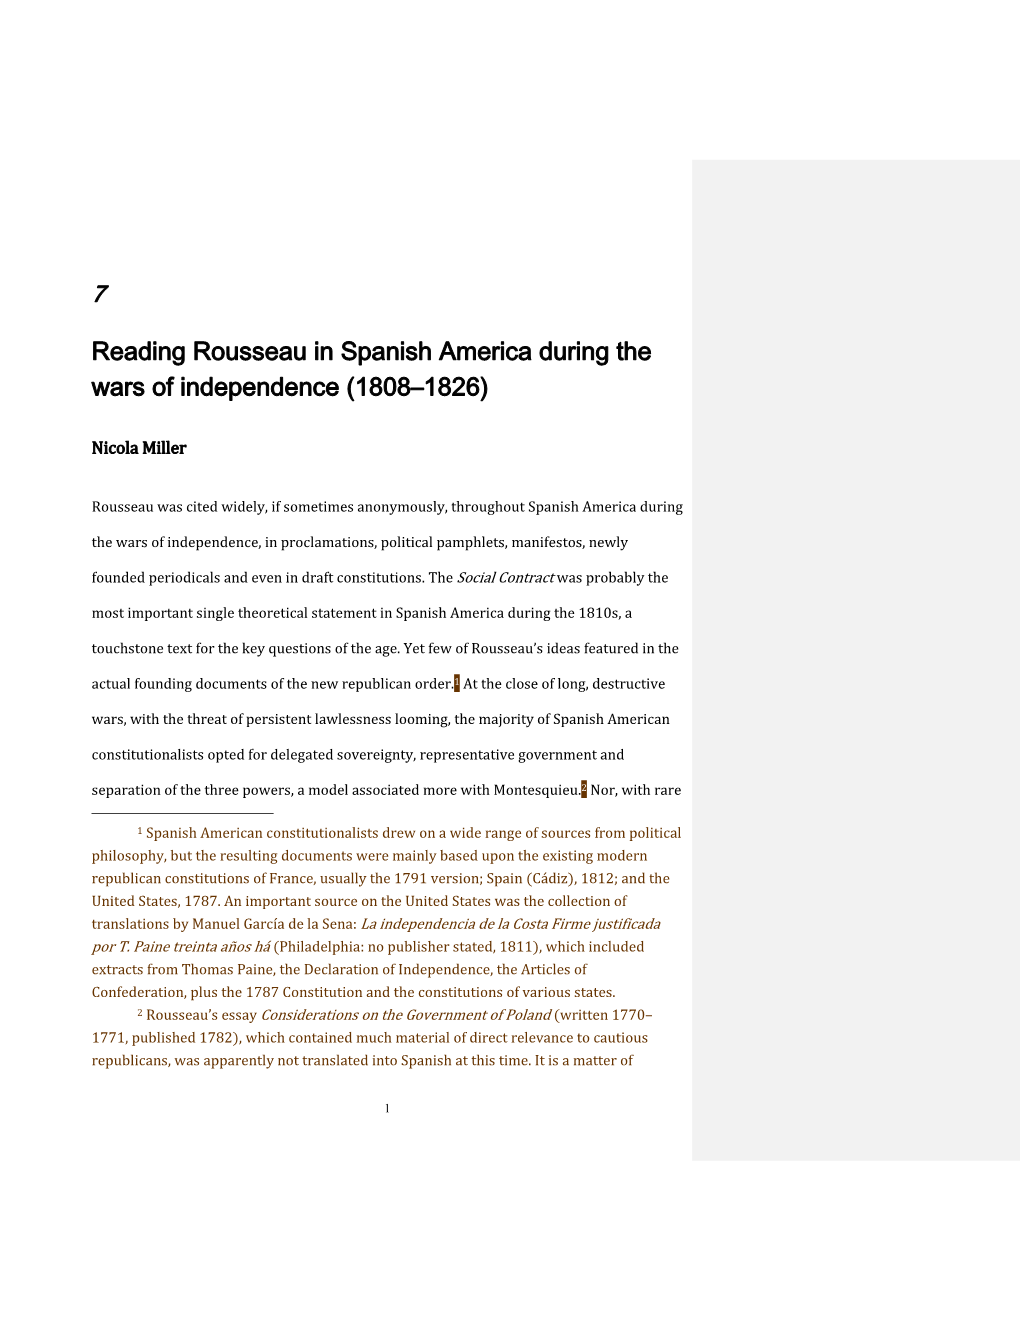 Reading Rousseau in Spanish America During the Wars of Independence (1808–1826)